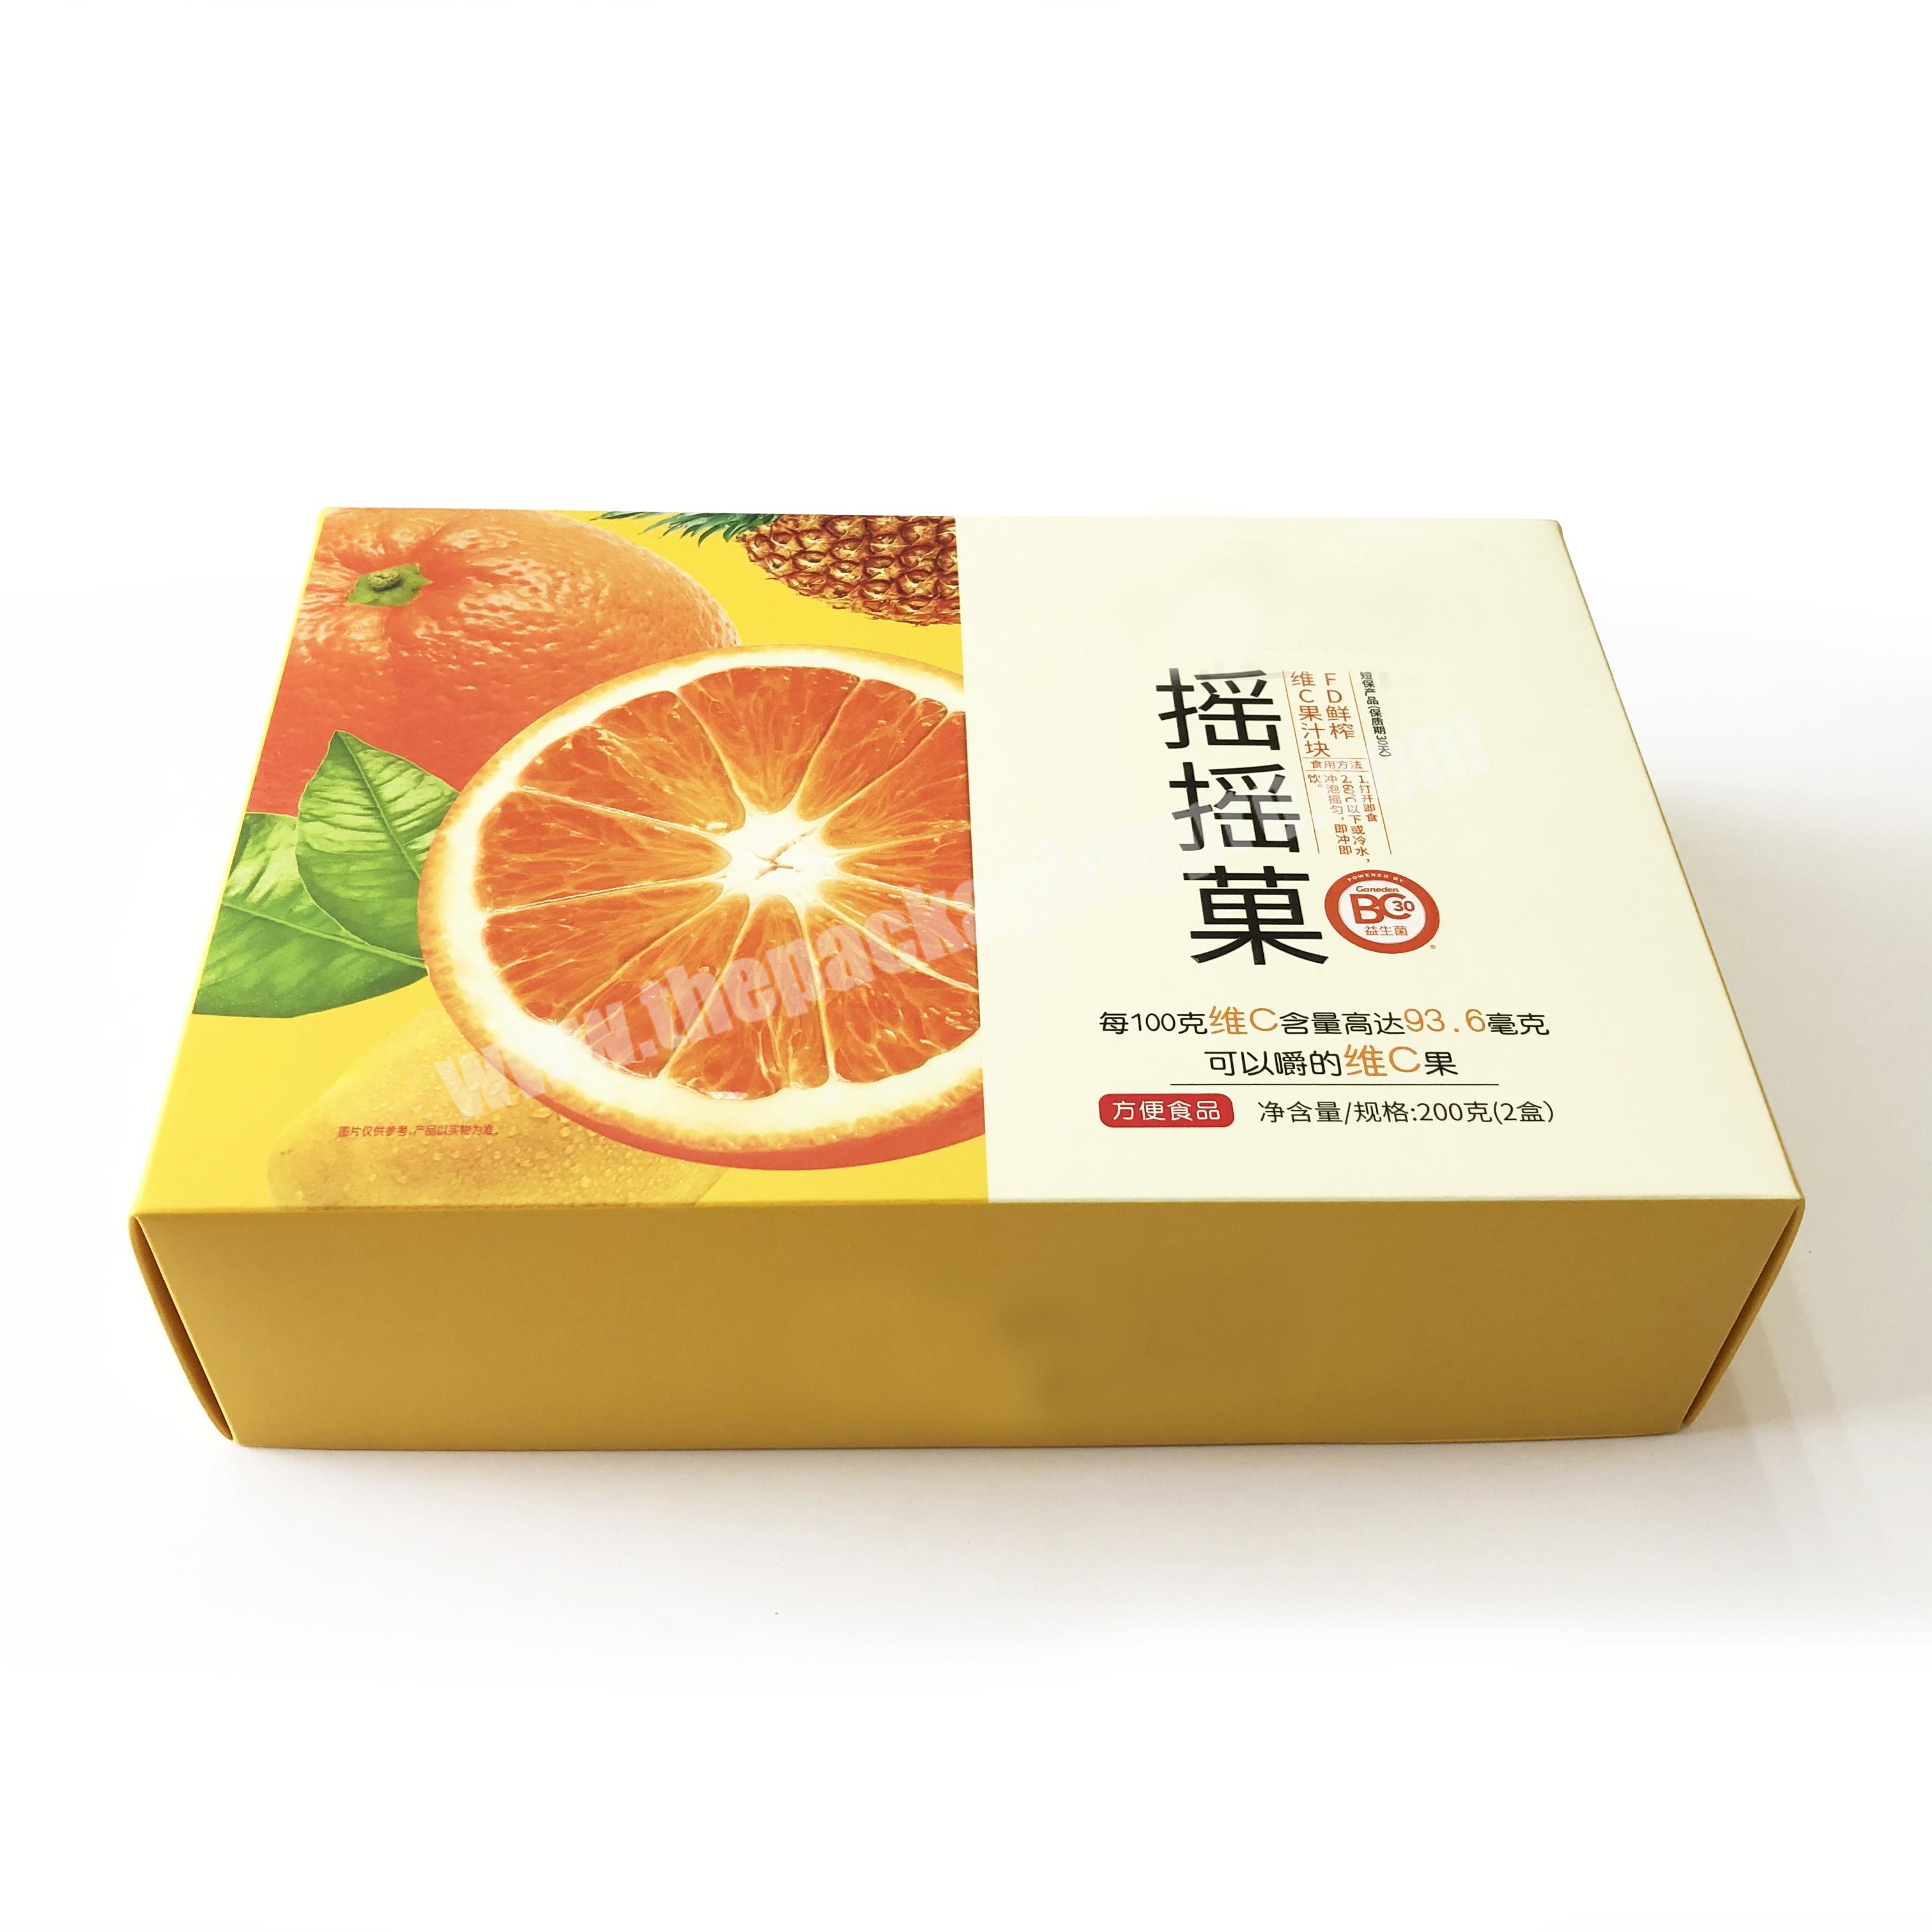 Customized  Corrugated Floding Full color packaging box with spot uv logo